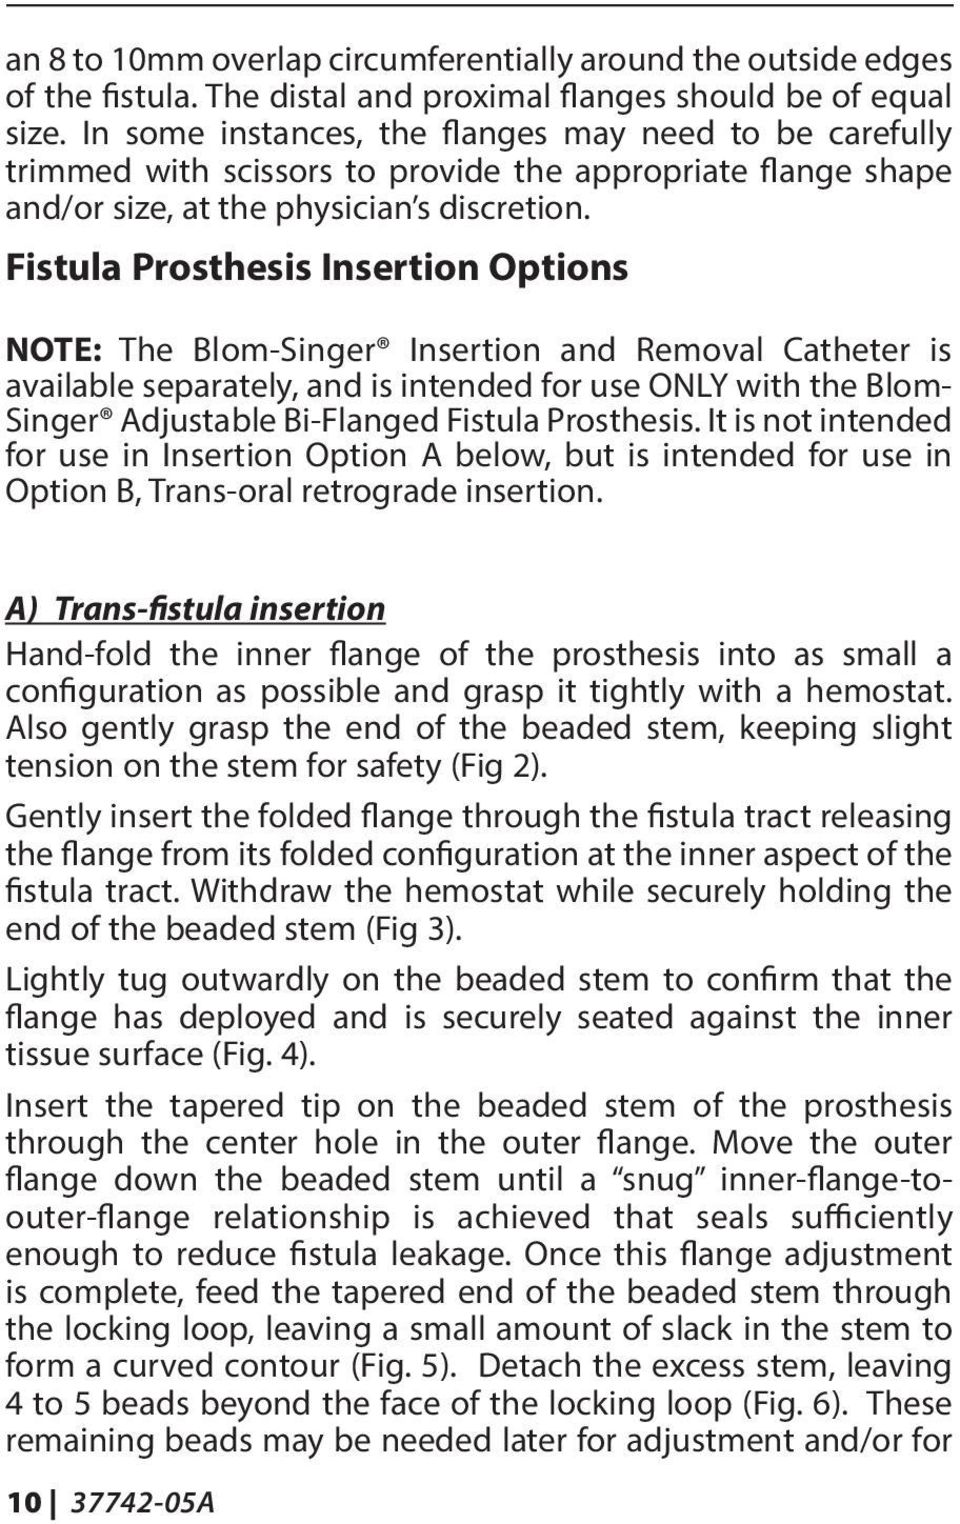 Fistula Prosthesis Insertion Options NOTE: The Blom-Singer Insertion and Removal Catheter is available separately, and is intended for use ONLY with the Blom- Singer Adjustable Bi-Flanged Fistula